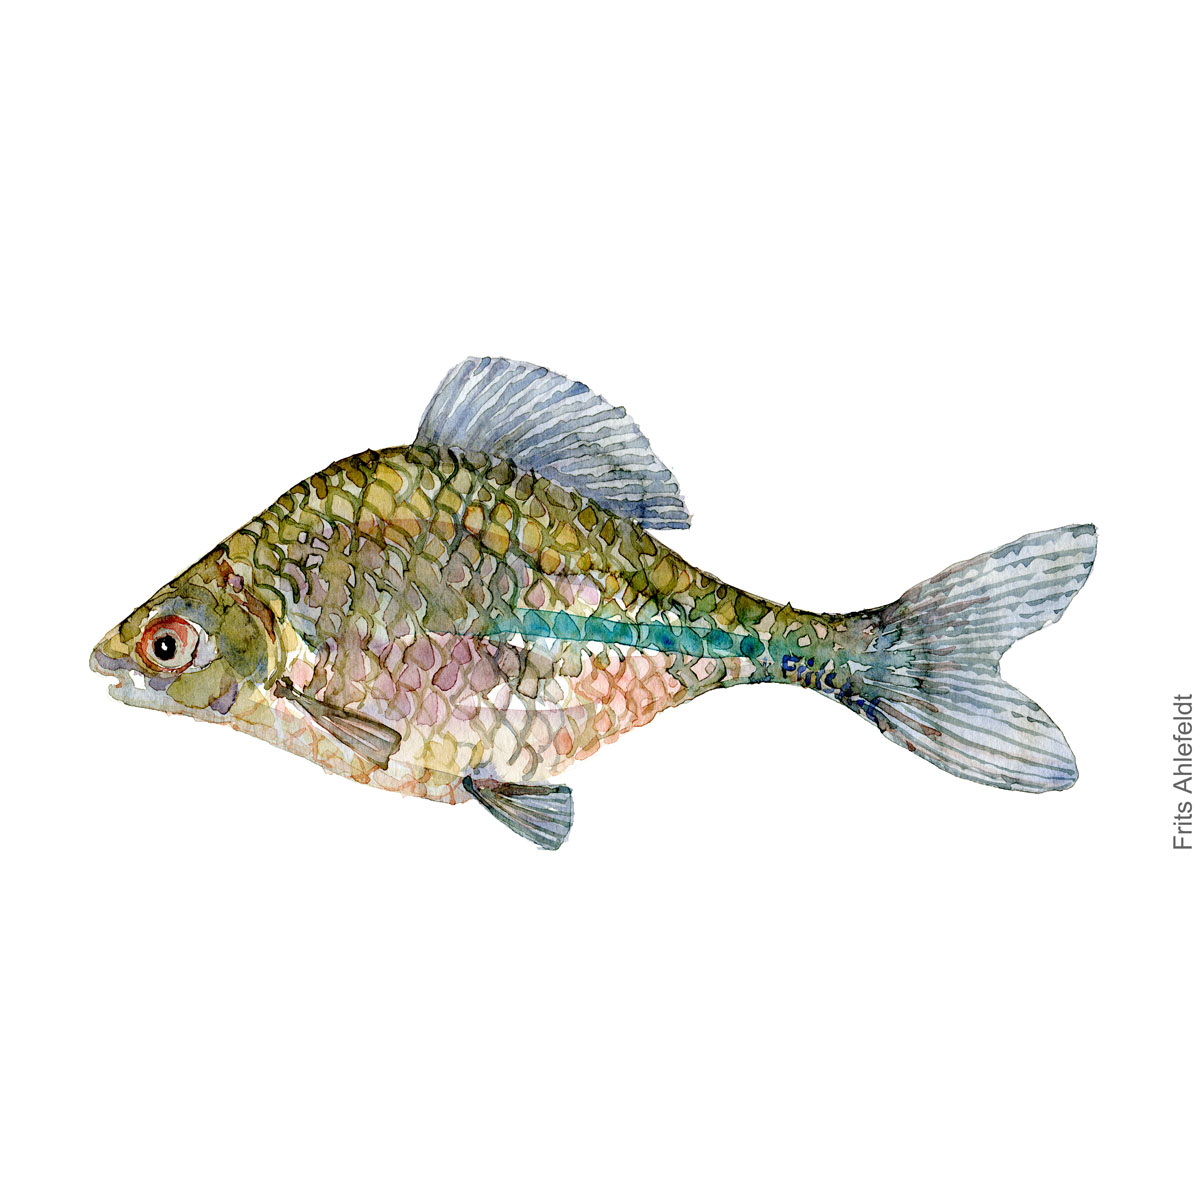 Bitterling Fish watercolor illustration by frits Ahlefeldt